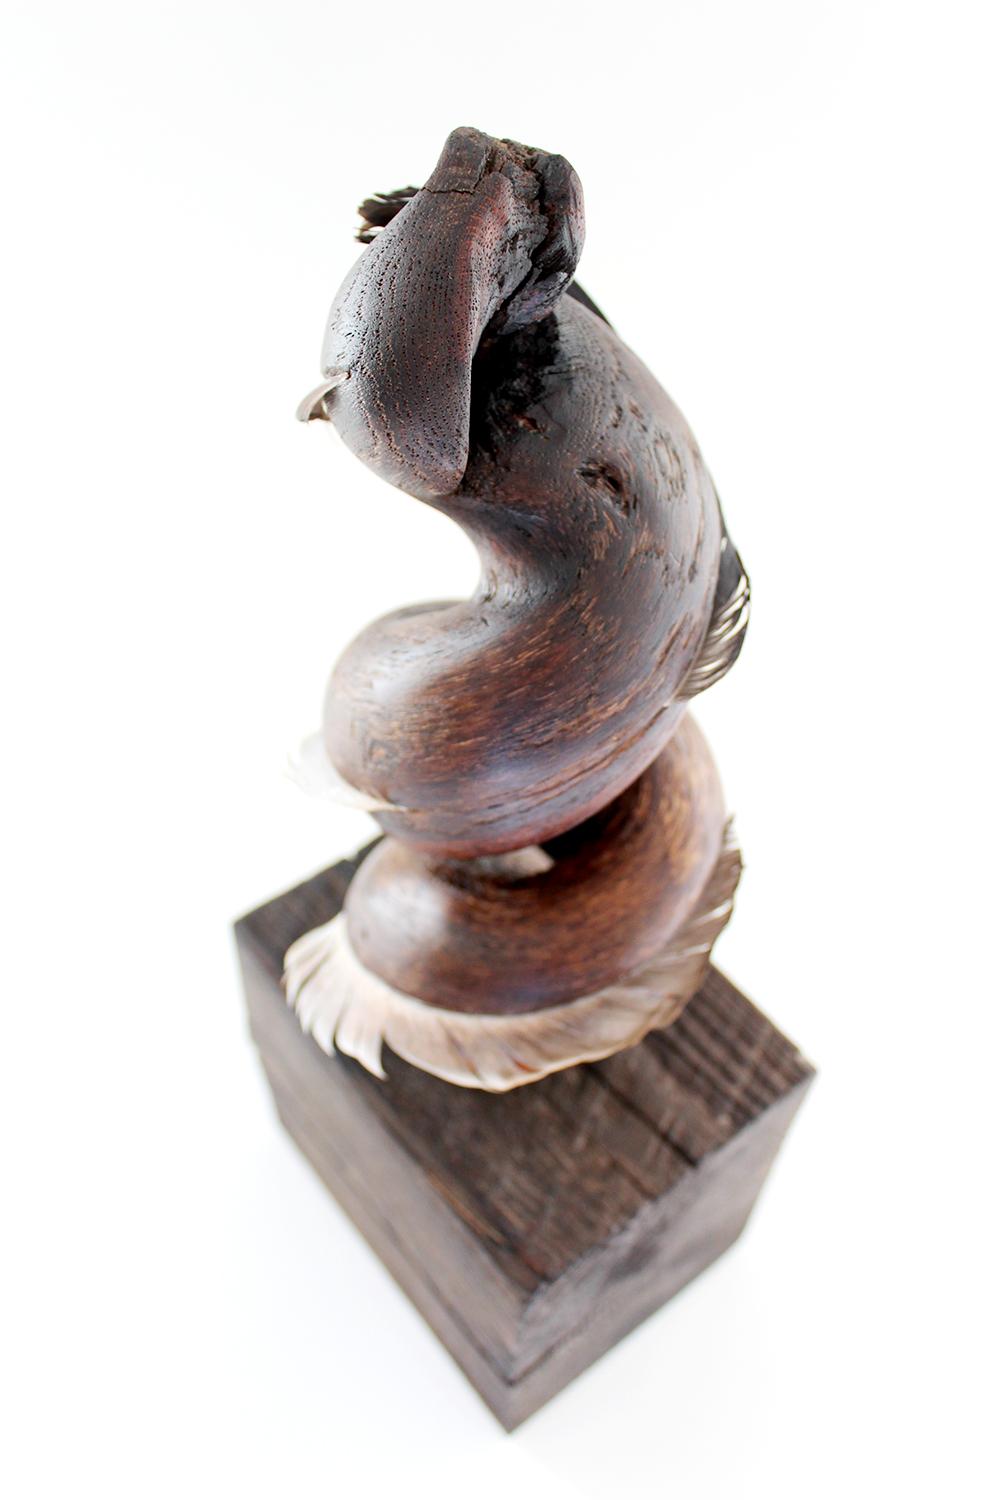 Miller Opie’s “Whispering Dervish” is a gestural 13.5 x 5 x 4 inch White Oak wood sculpture with found feather details embedded into the wooden grain. It is the third piece in her 8 piece 